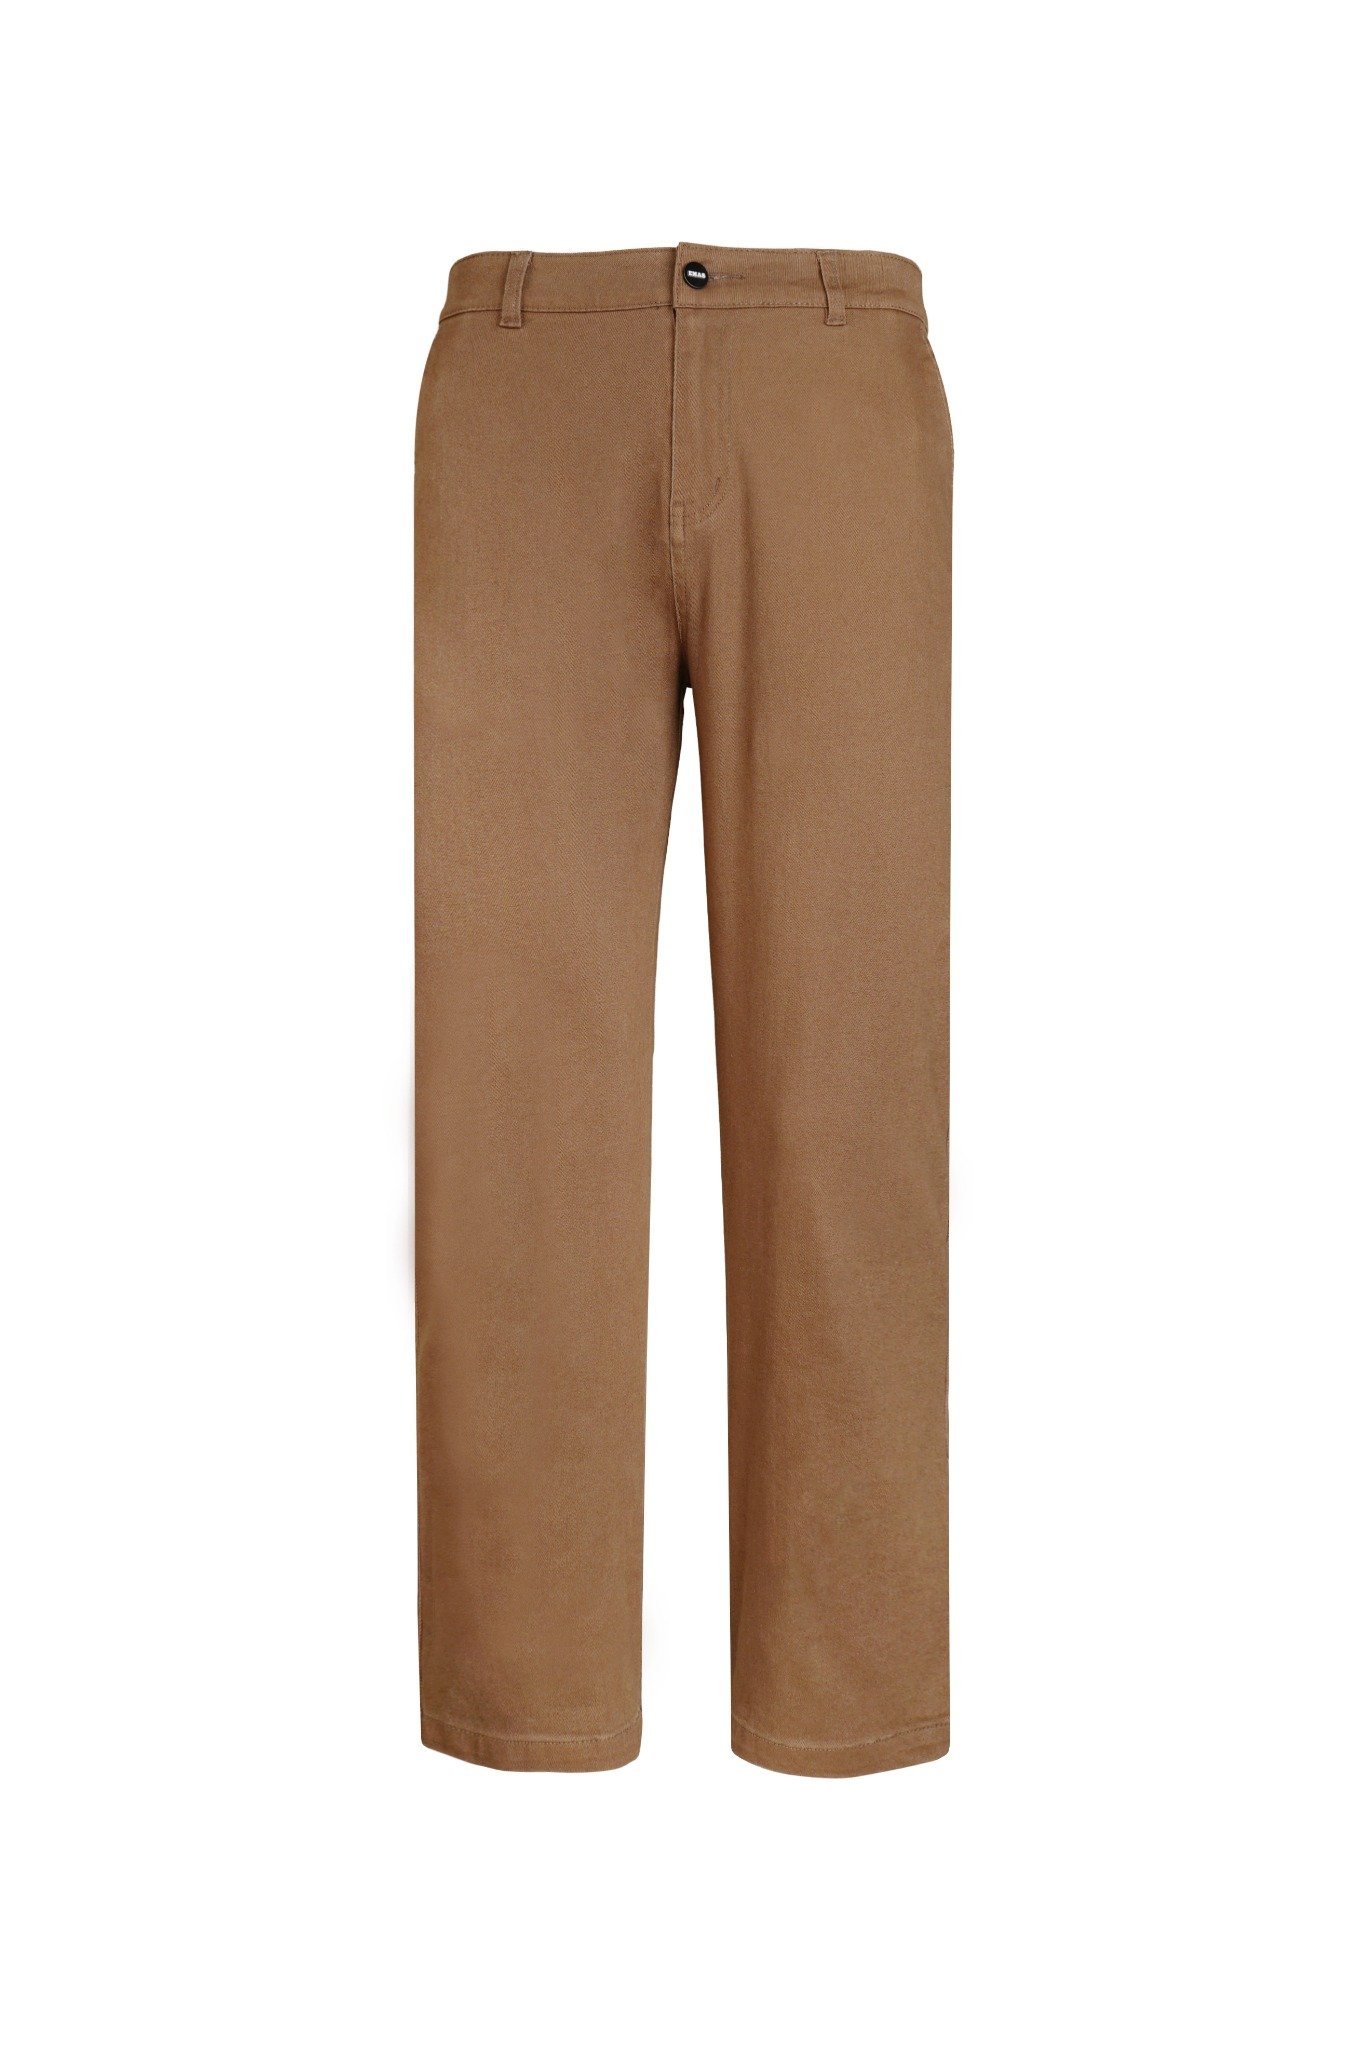 Whiskey Brown Chinos Limited Edition Brown Chinos - Etsy